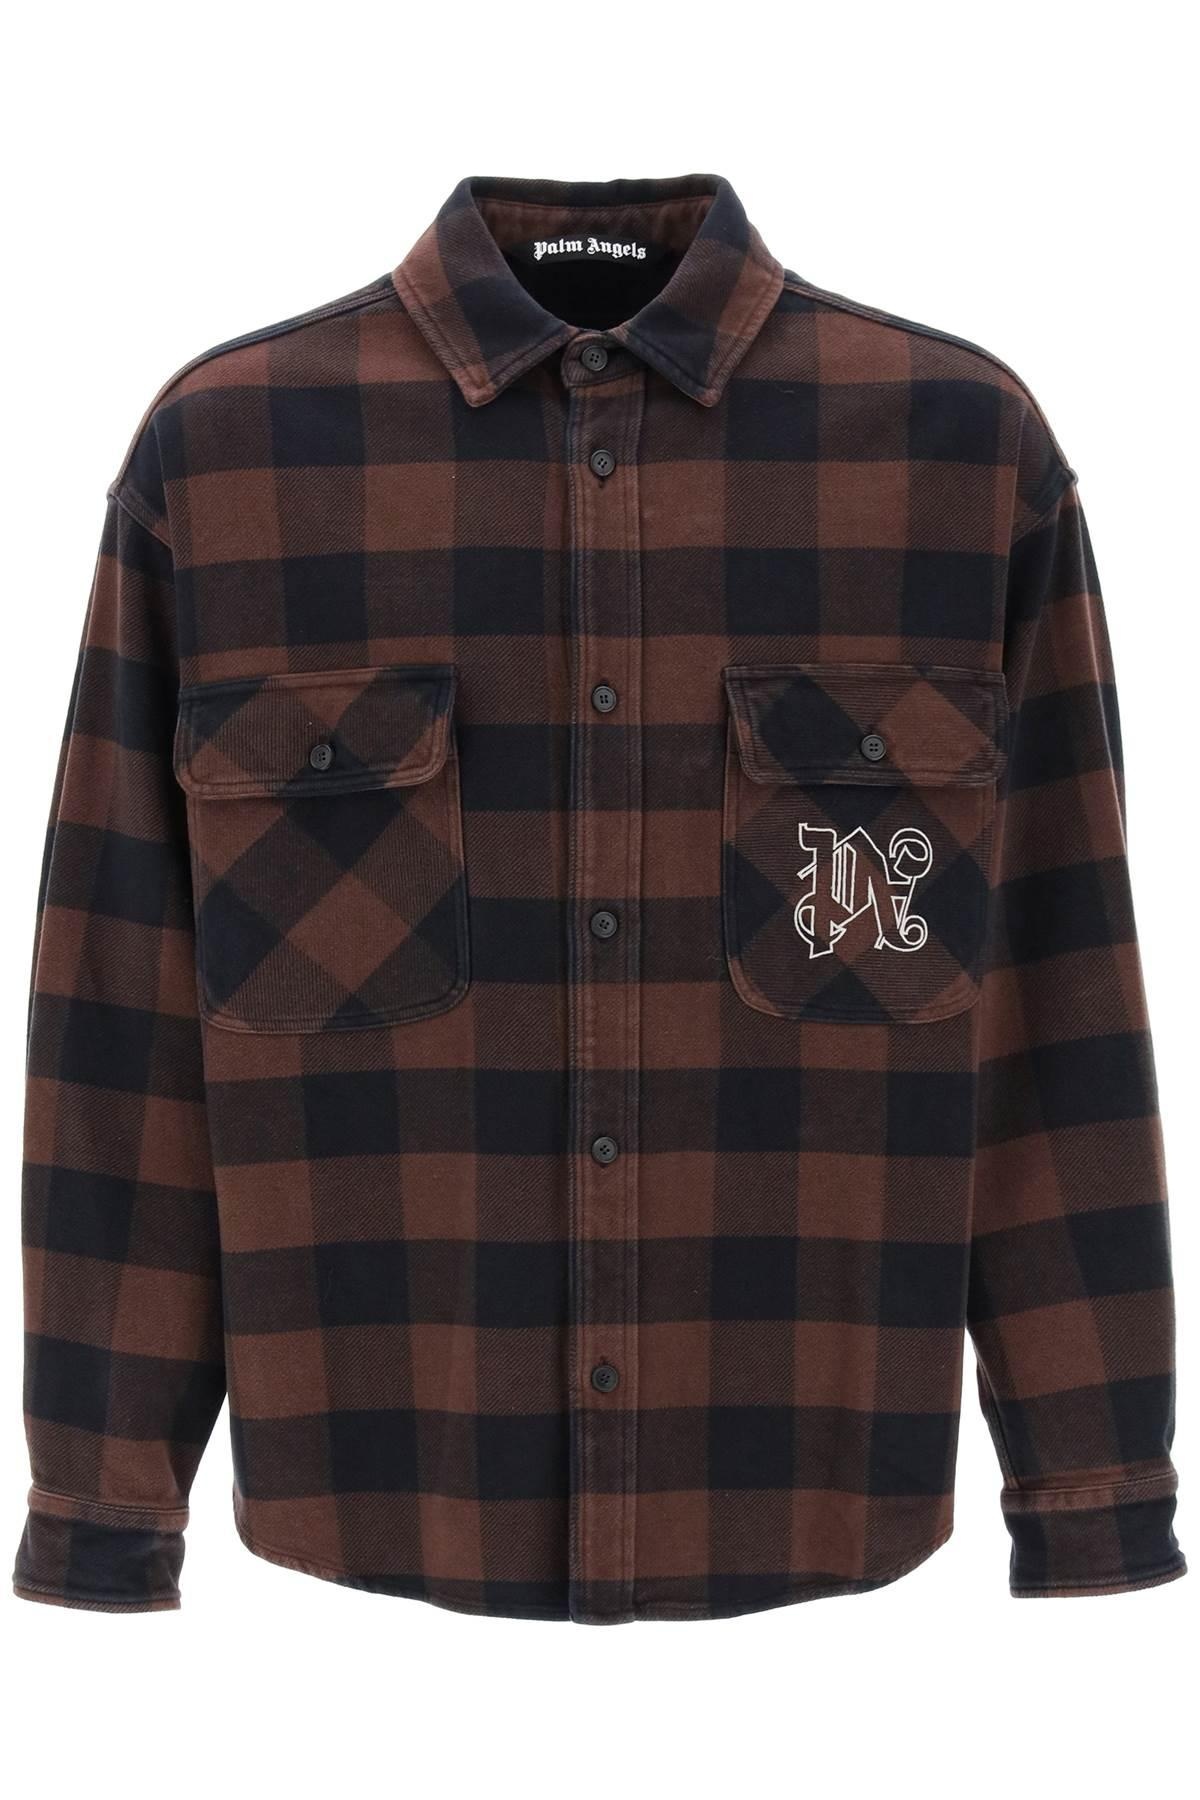 PALM ANGELS FLANNEL OVERSHIRT WITH CHECK MOTIF - 1